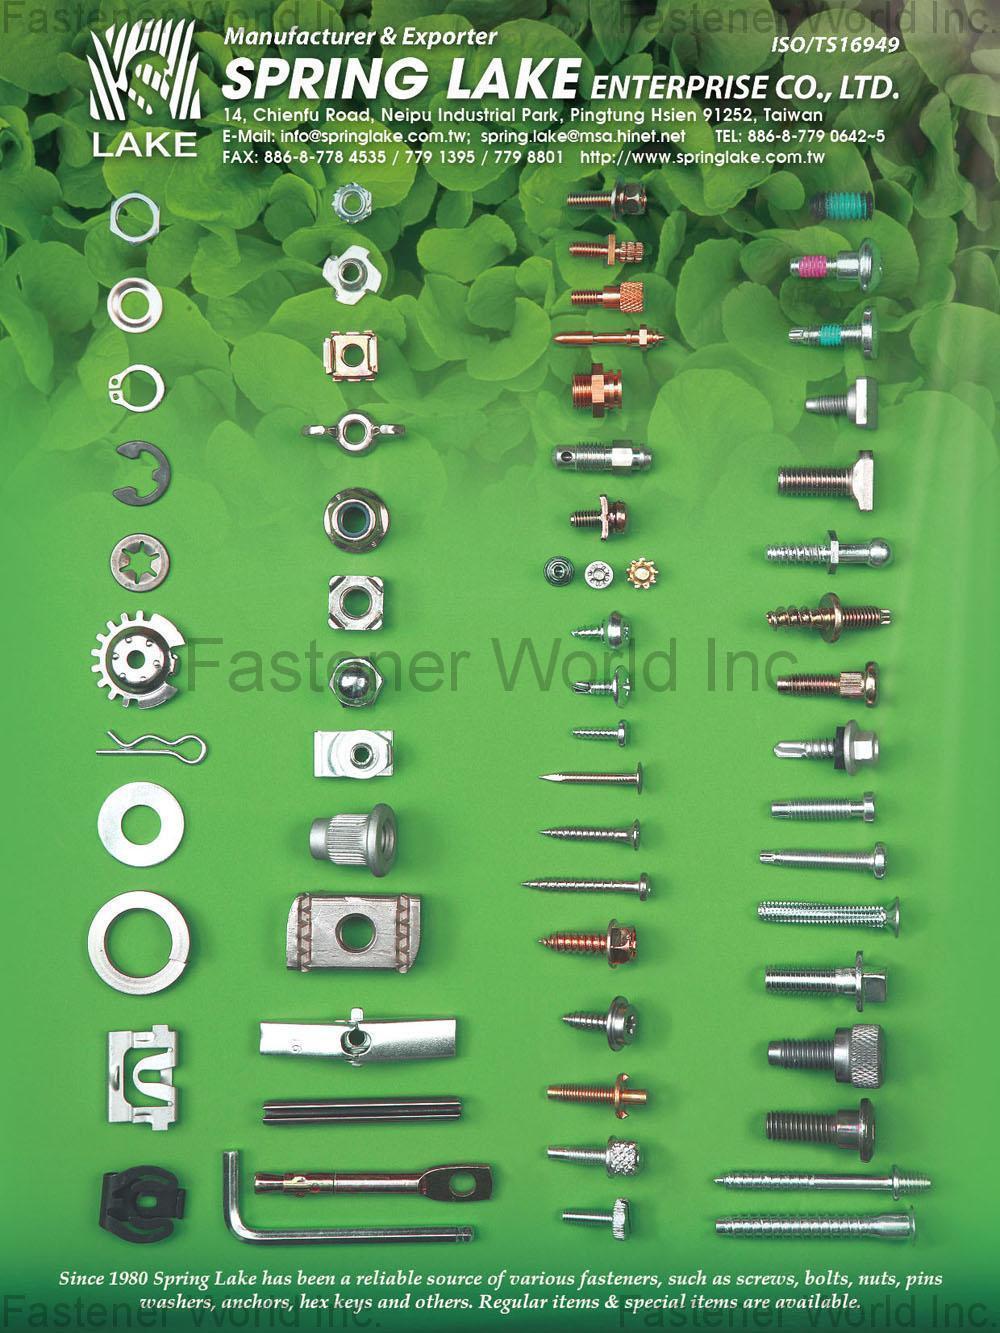 All Kinds Of Nuts Various Fasteners, Screws, Bolts, Nuts, Pins, Washers, Anchors, Hex Keys...